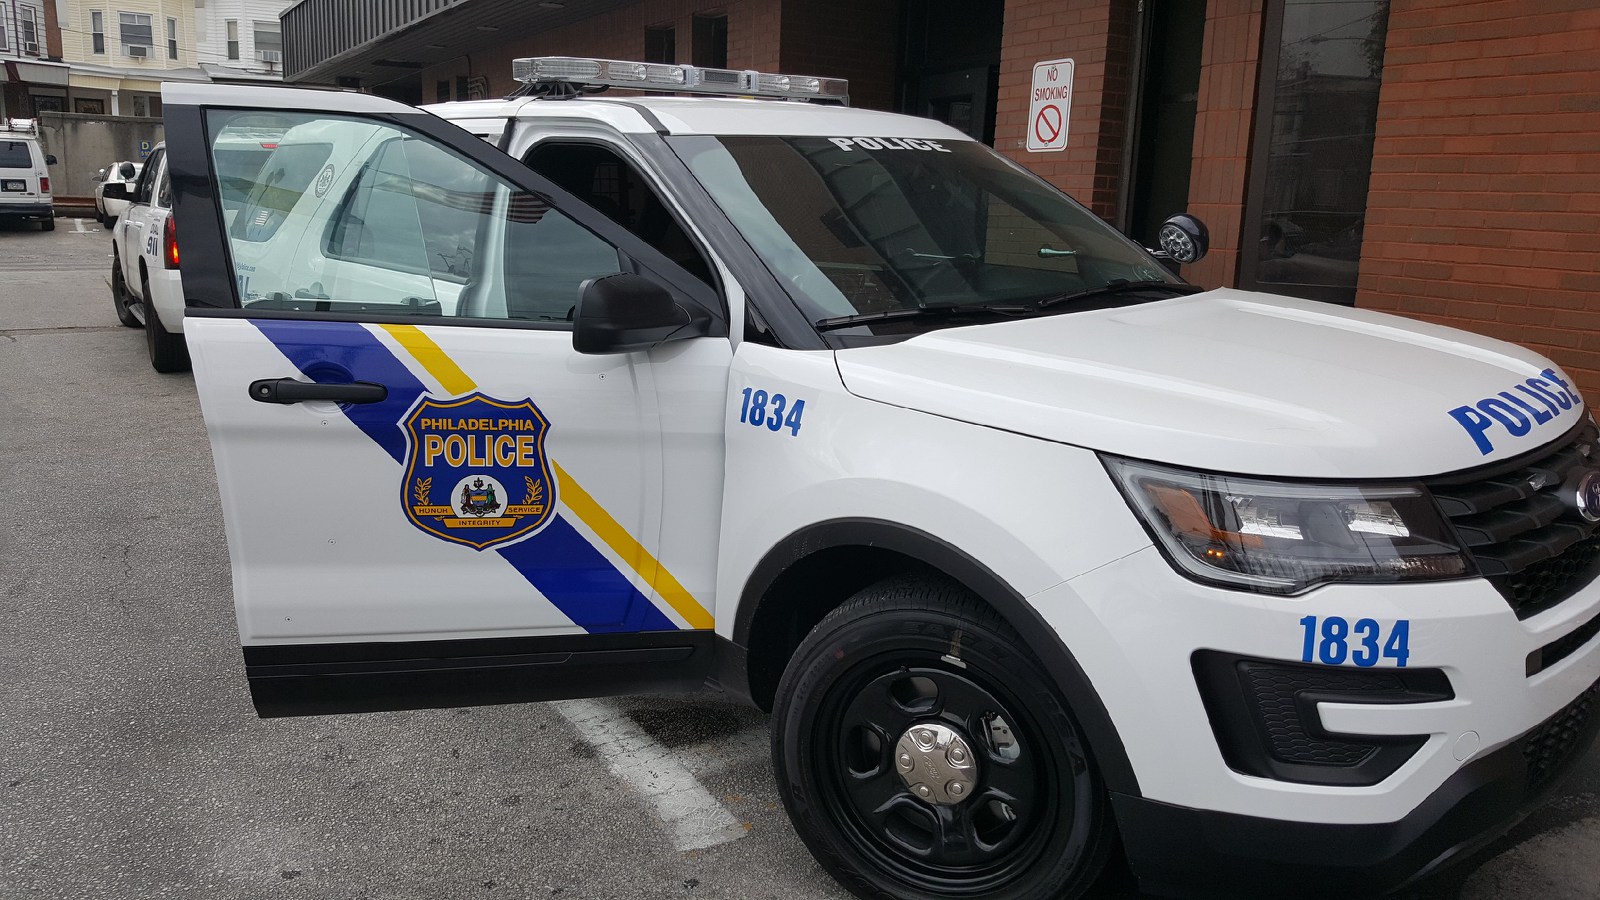 A sport utility style vehicle with the Philadelphia Police Department shield on it's open passenger front door sits in a police district parking lot. The vehicle is modern and has police lights on its roof.